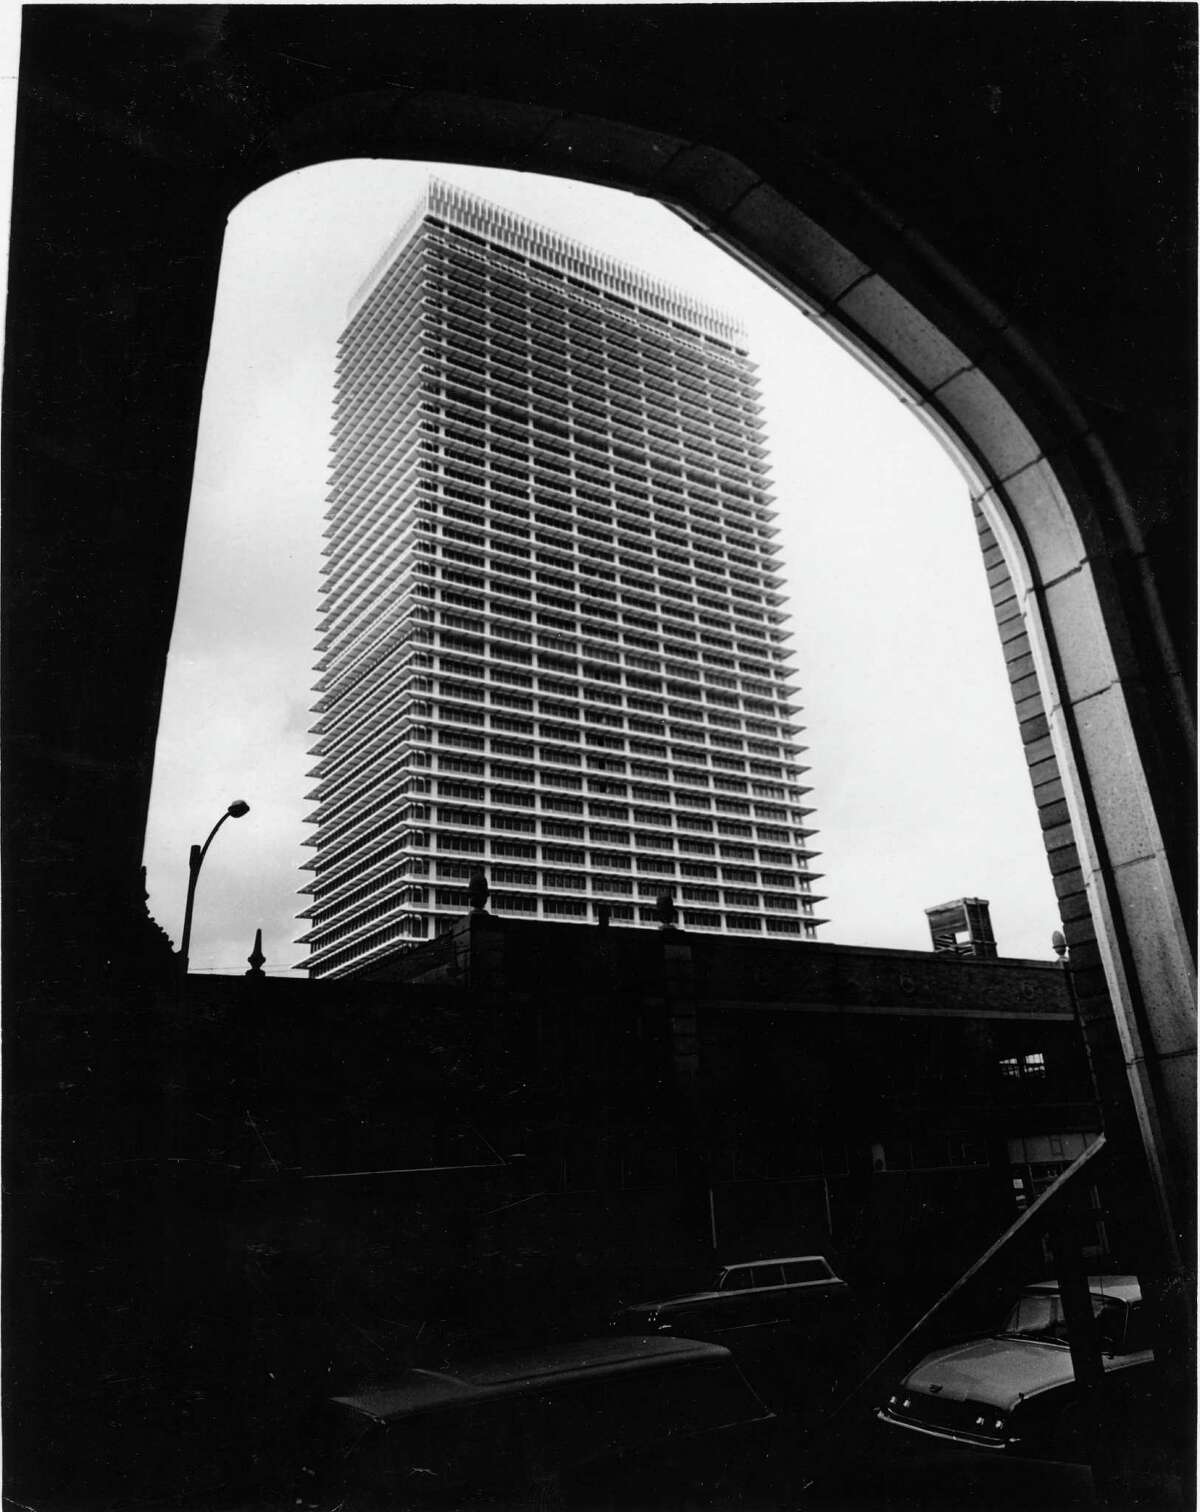 The Humble Oil skyscraper was an immediate landmark. From the Chronicle files. The caption from November 1962: "Framed by an archway of the First Methodist Church at 1320 Main, the Humble Building, at 800 Bell, fills the sky. The building's distinctive cantilevered skin is already familiar to Houstonians."